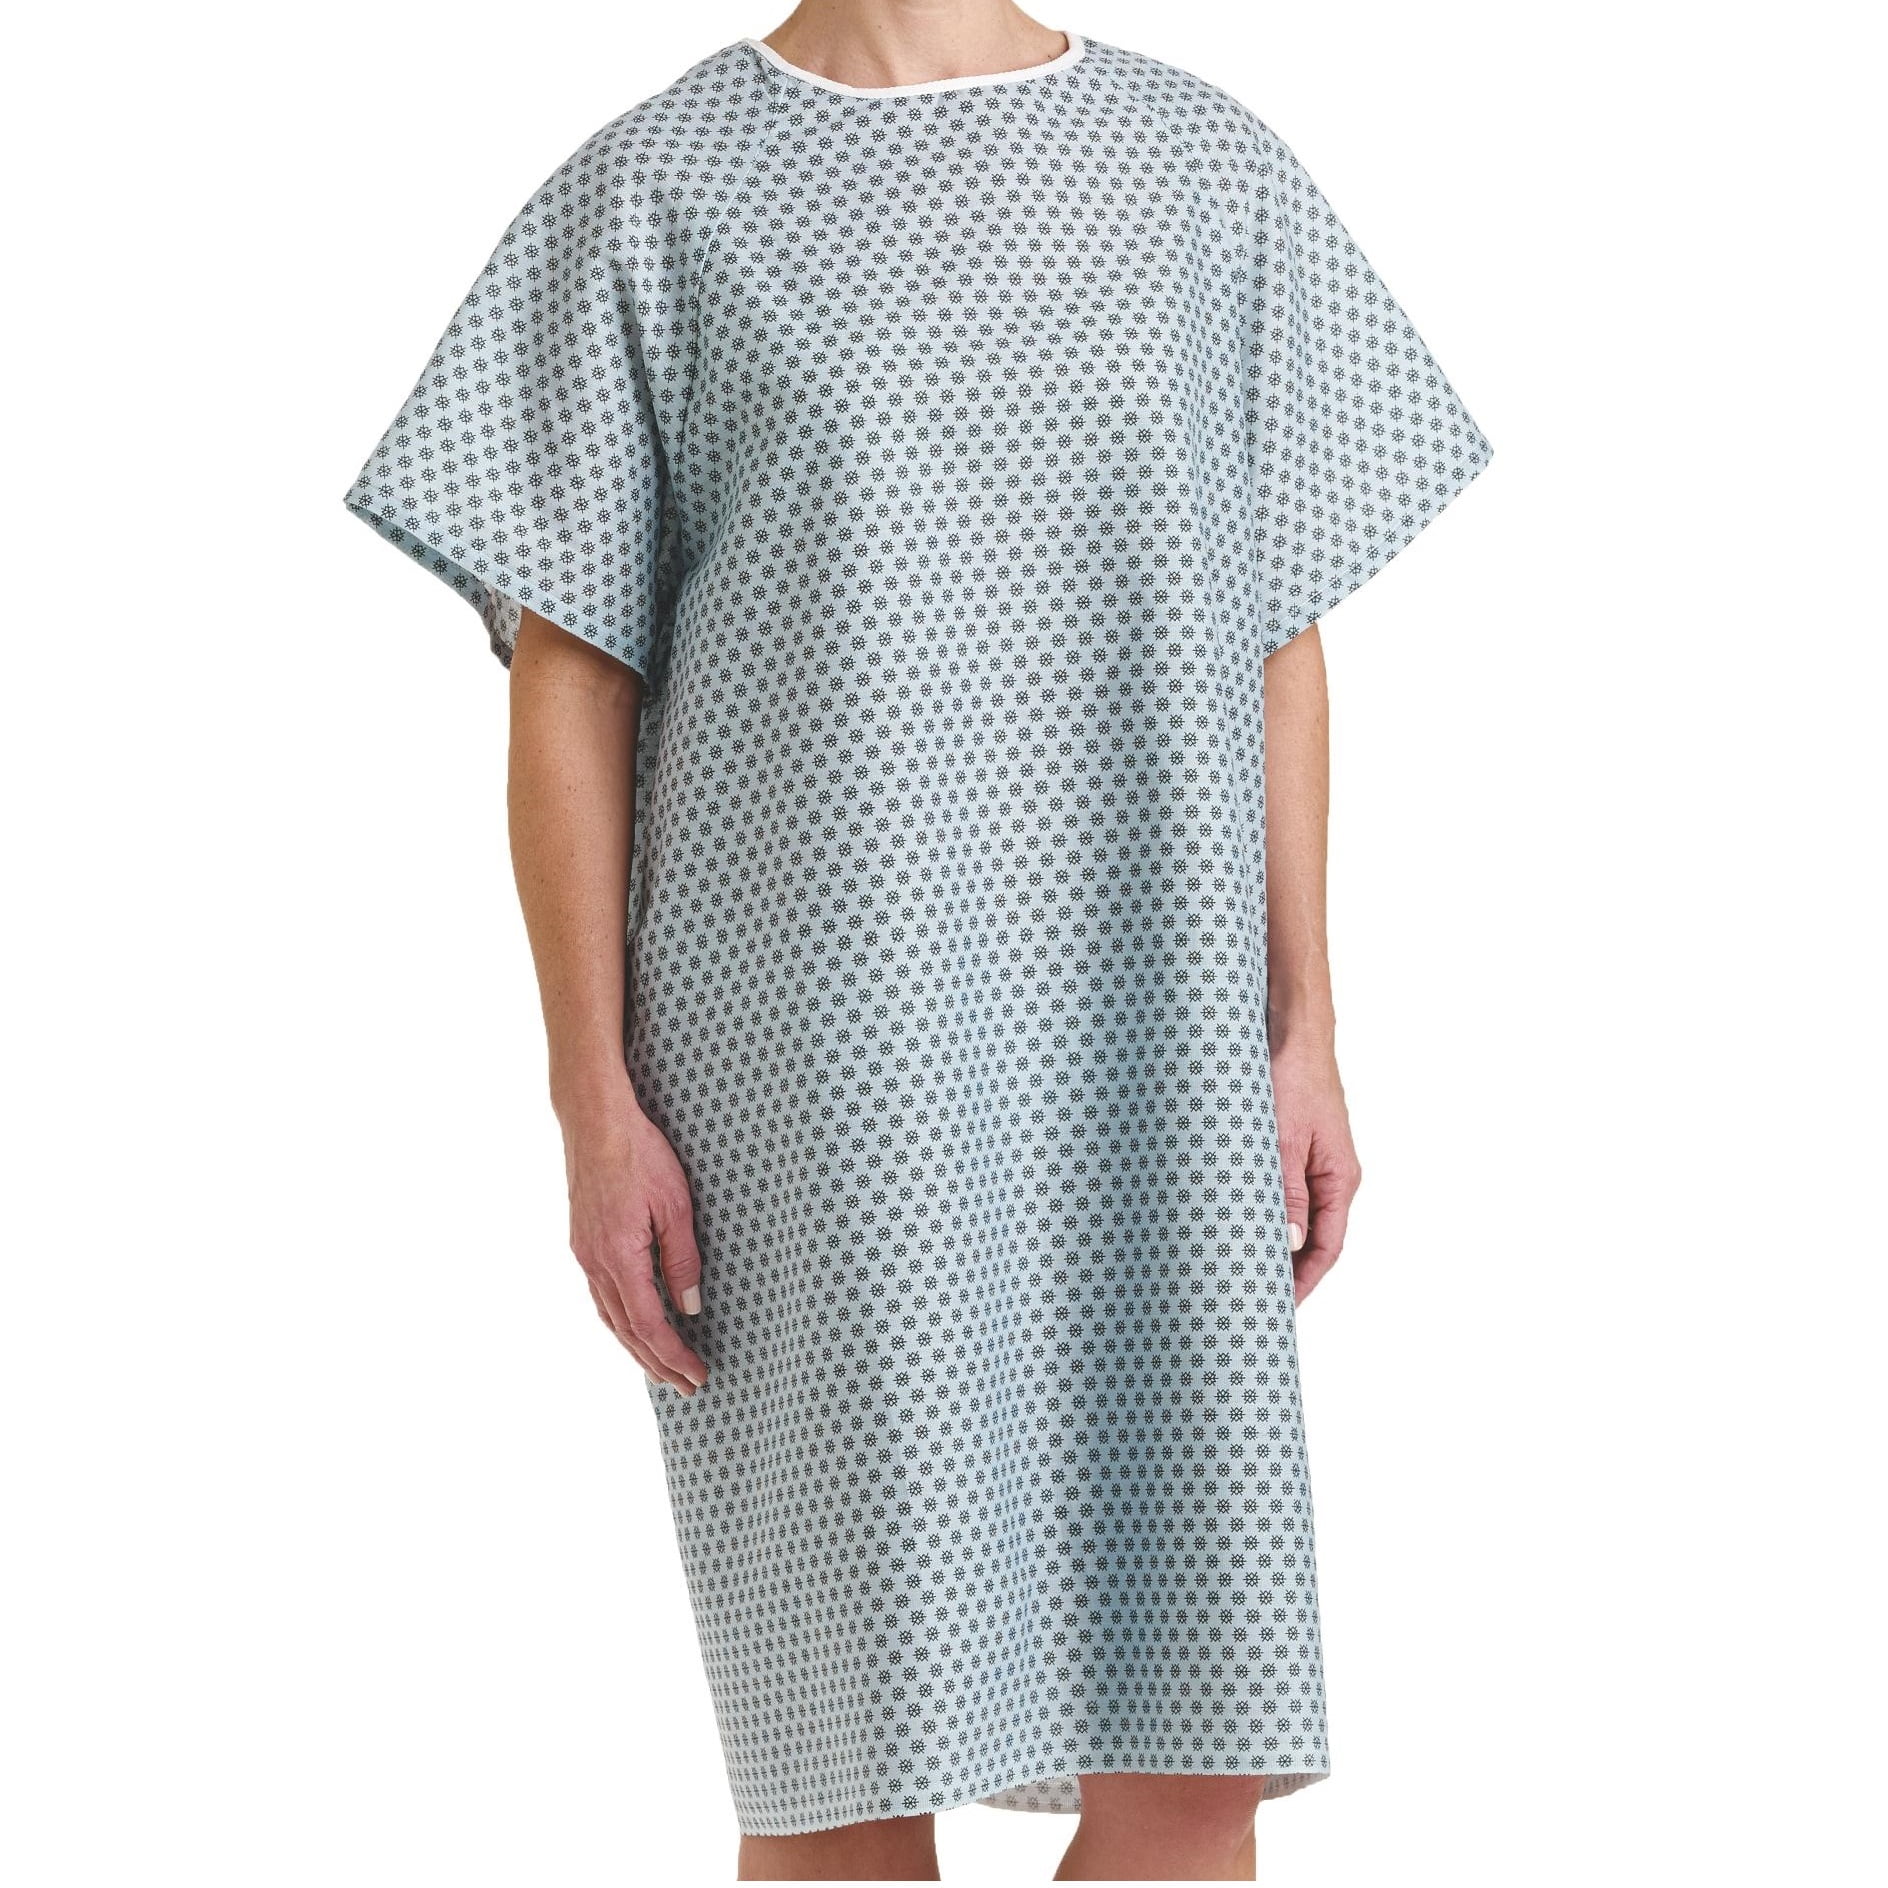 Personal Touch Unisex Hospital Patient Gown - One Size Pack of 4  (Teal/Black Diamond Sunshine) - Walmart.com